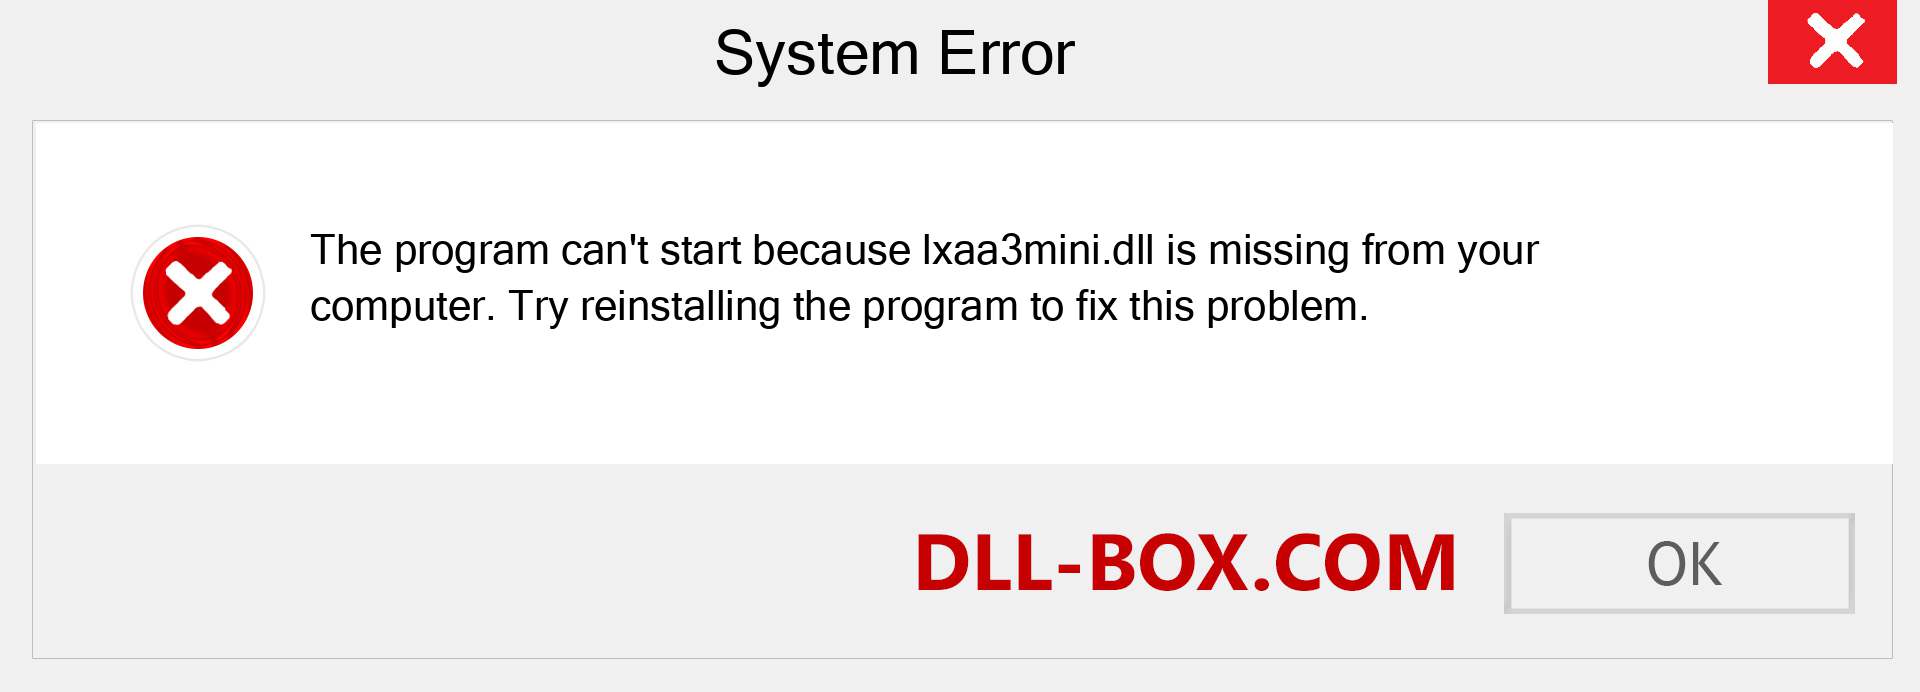  lxaa3mini.dll file is missing?. Download for Windows 7, 8, 10 - Fix  lxaa3mini dll Missing Error on Windows, photos, images